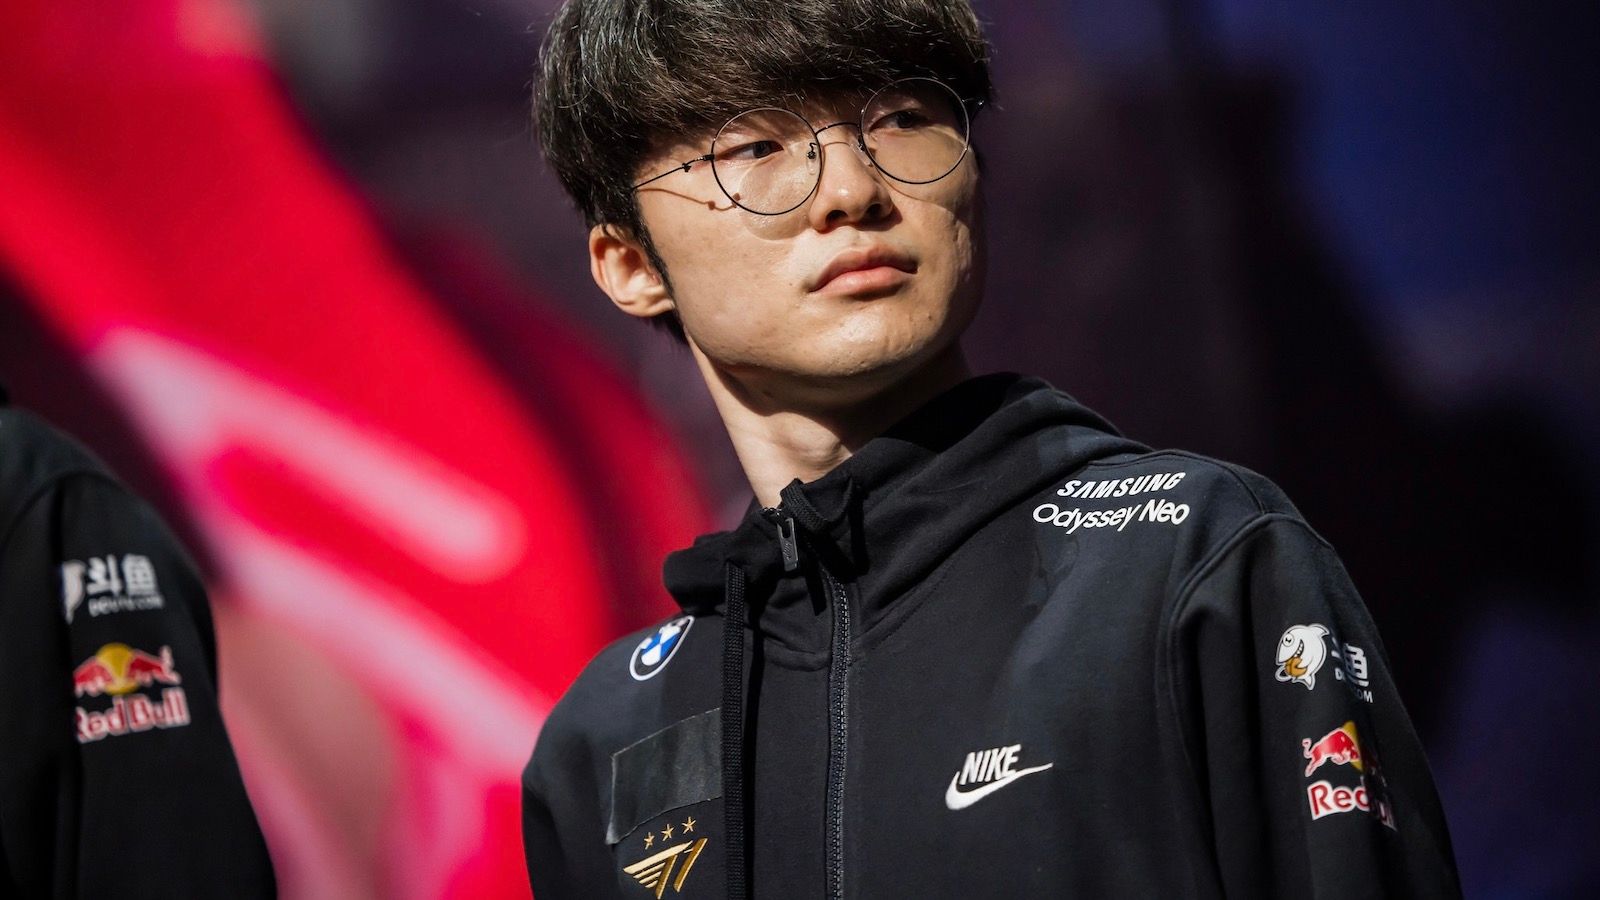 Faker to T1 teammates: You guys did a great job. From the bottom